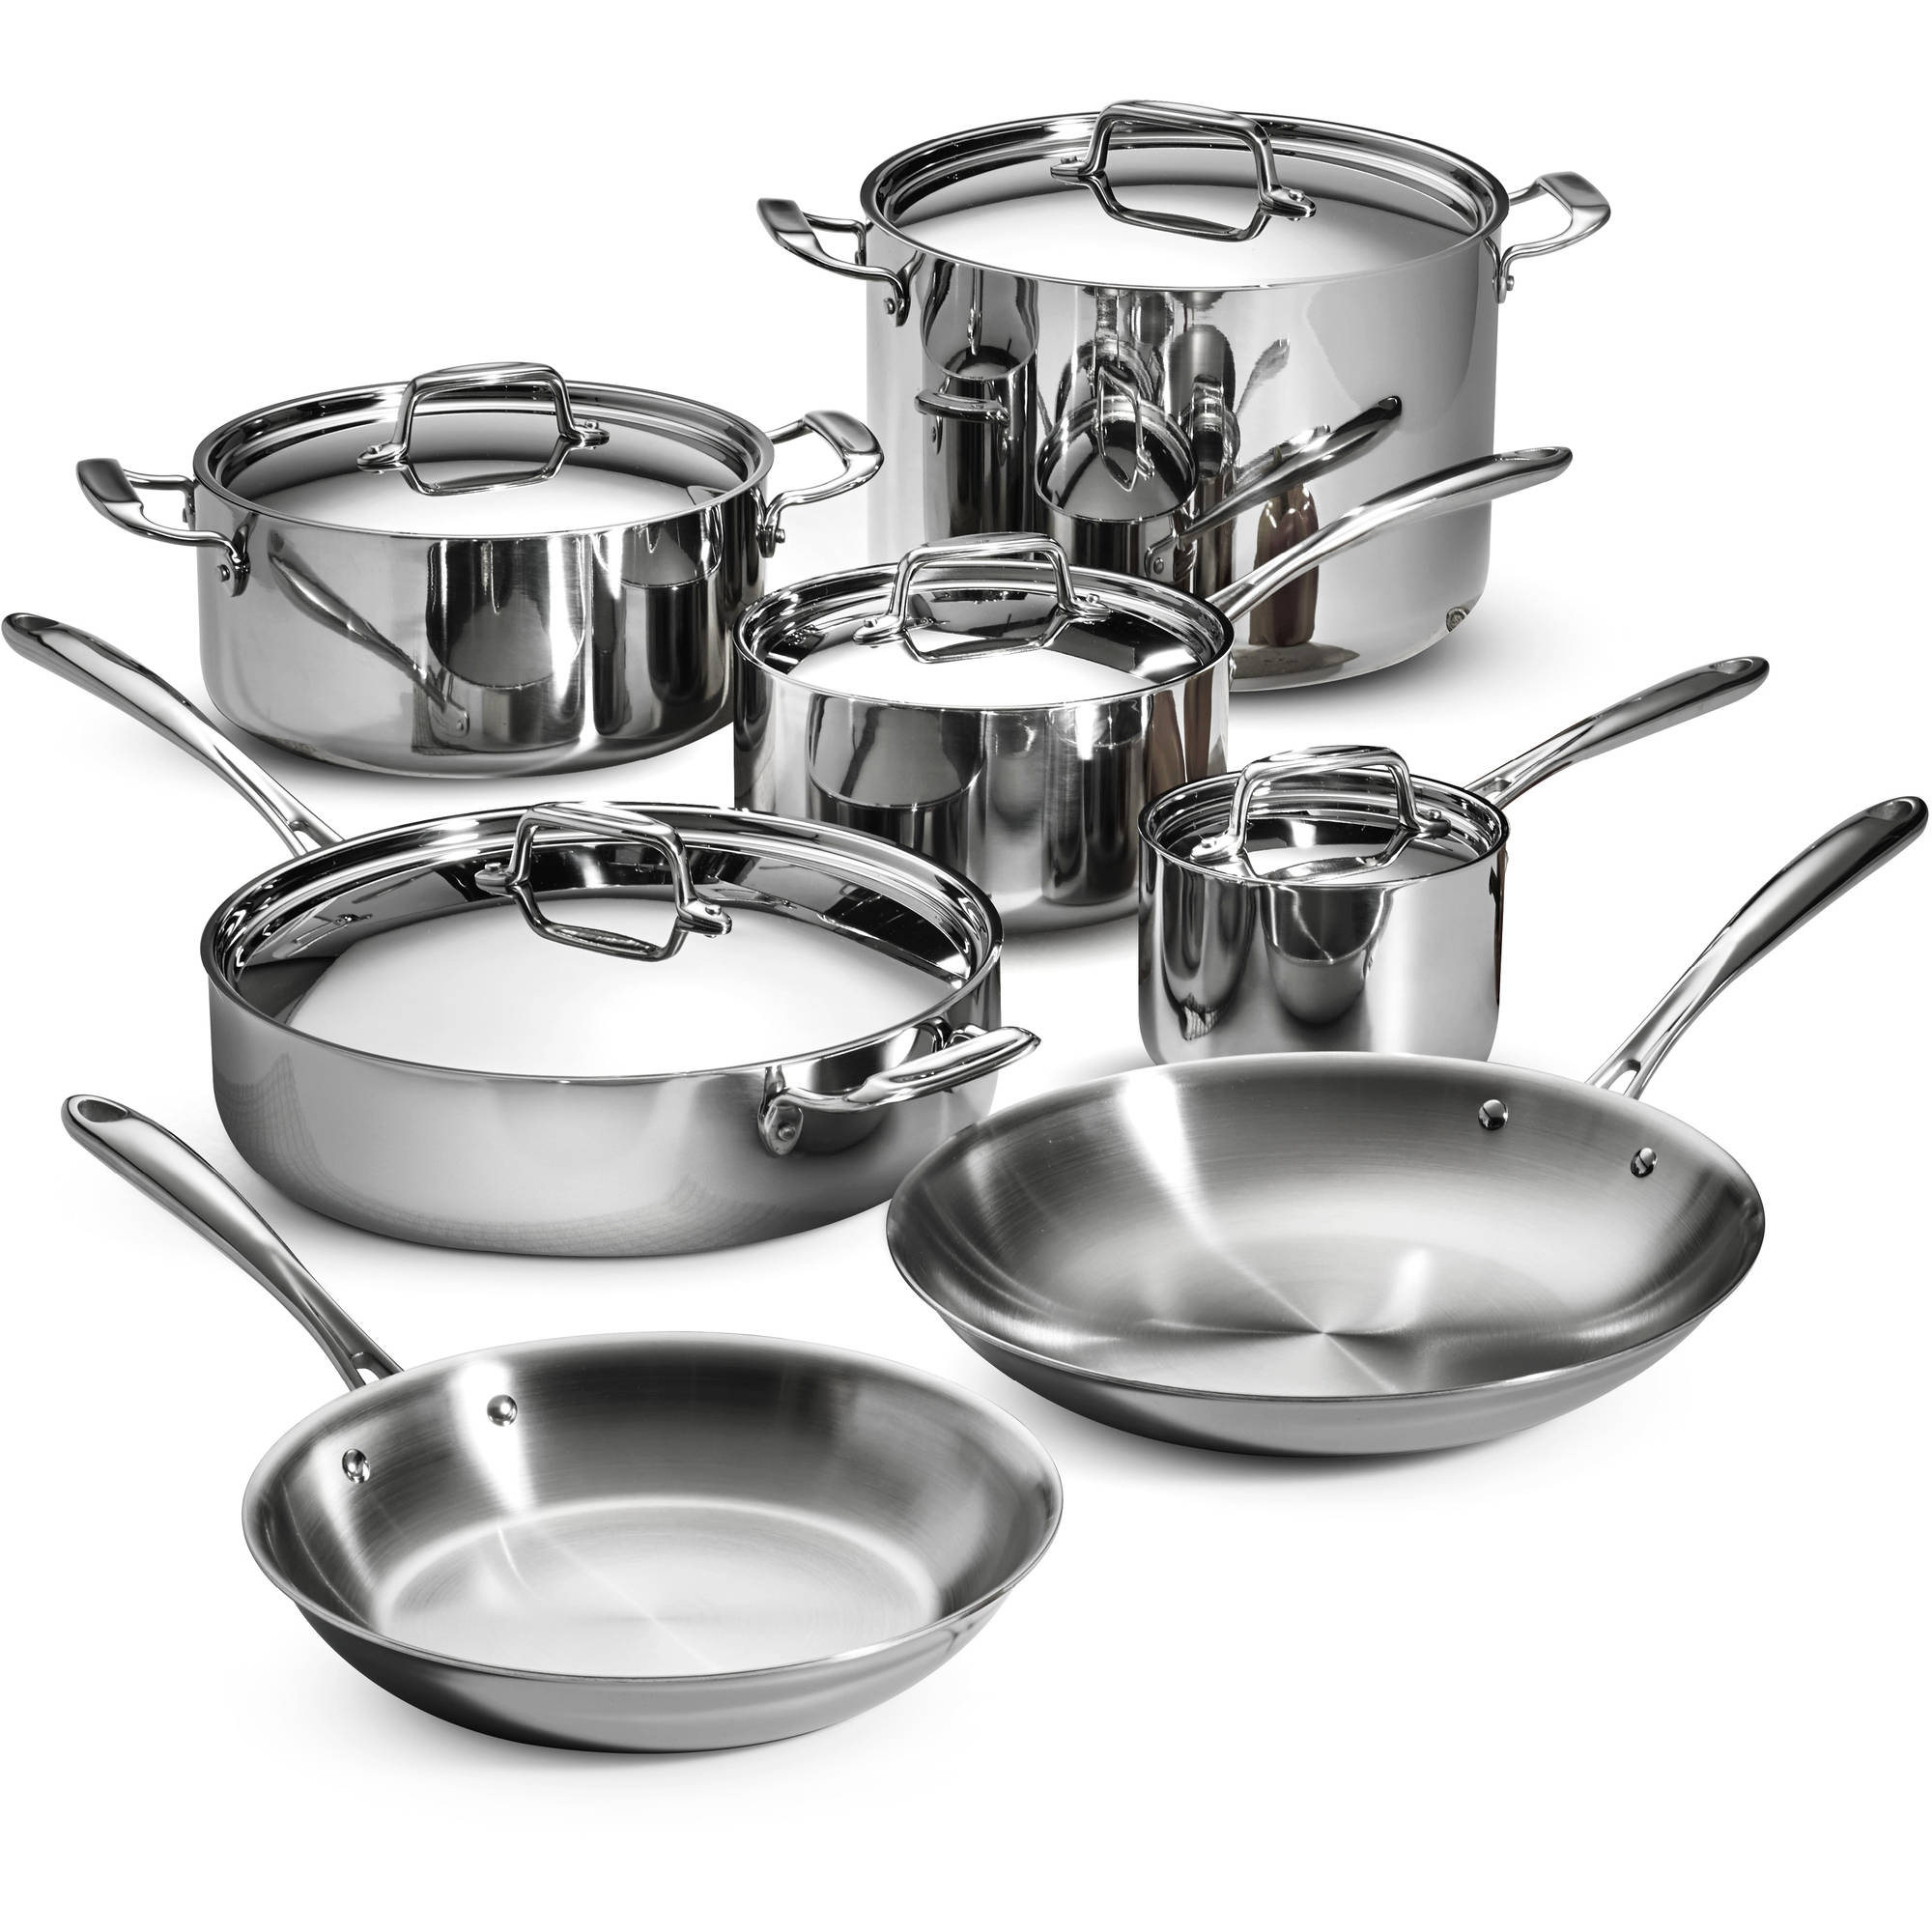 The Benefits of Using Stainless Steel Pans